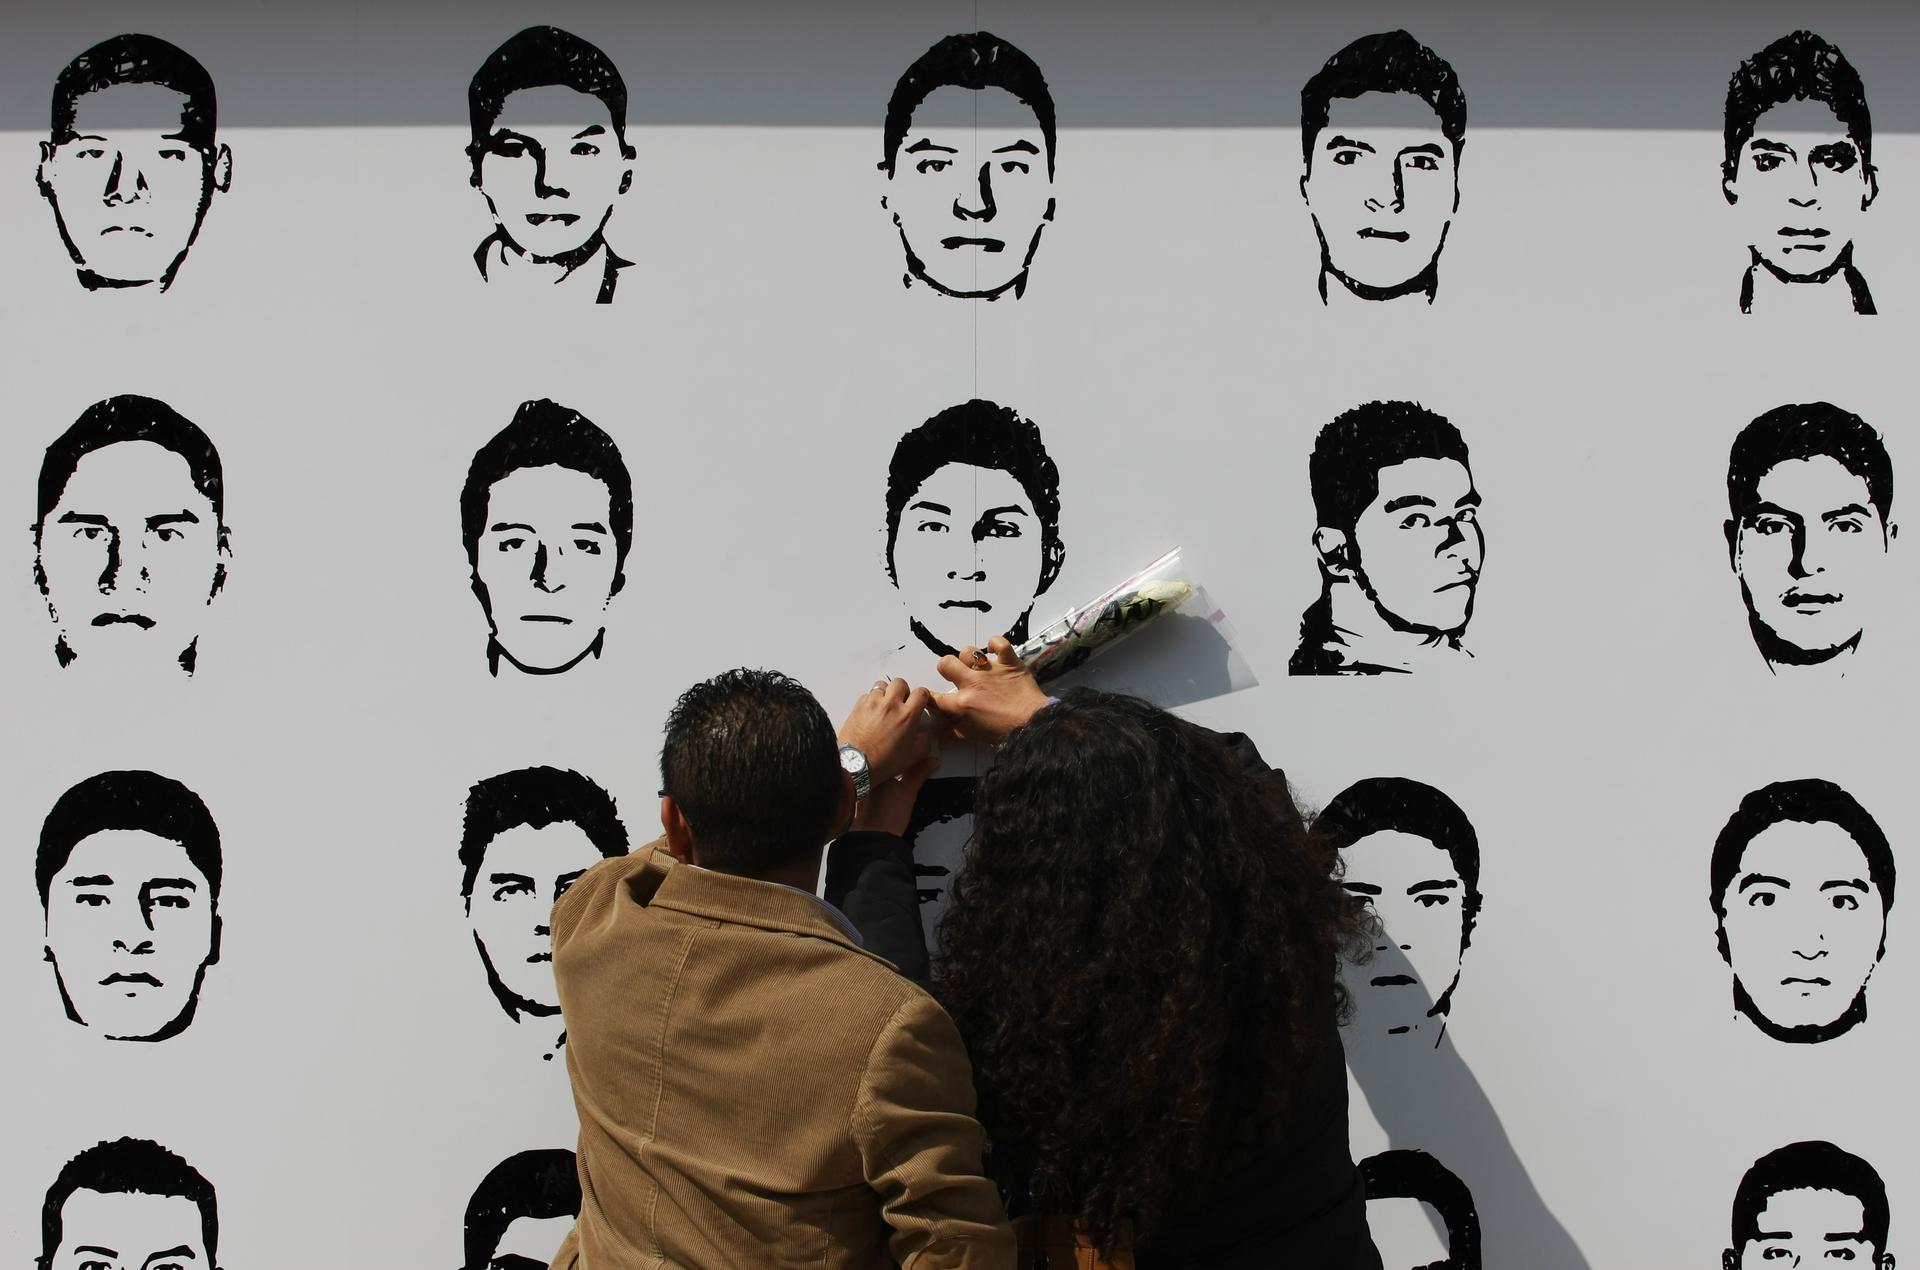 In Mexico City, people attach flowers to a mural showing the faces of the 43 missing trainee teachers from he Ayotzinapa Teacher Training College Raul Isidro Burgos.